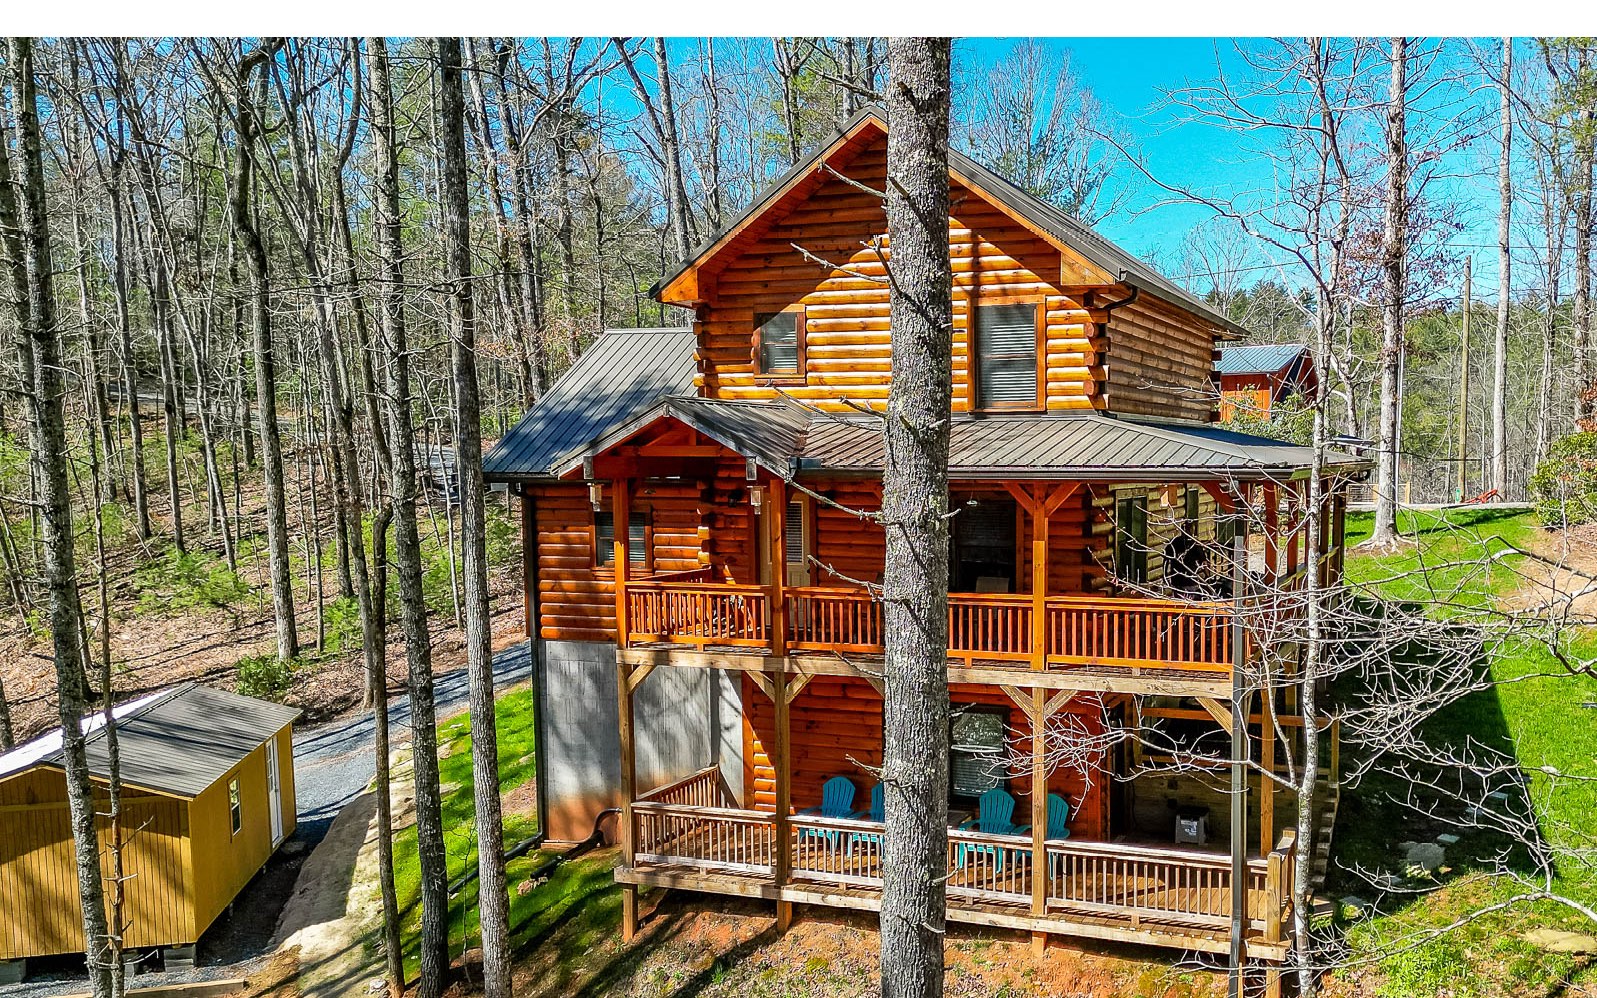 Stunning setting, true log home, and near the wilderness, this is what you've been looking for in a north GA mountain getaway! Only 2 years old, this new custom built cabin offers nearly 3 acres of gorgeous landscape and over 200 feet of frontage on Harpers Creek. Enjoy lots of level terrain for playing near the stream, sitting by the fire pit, and more. This cabin features a metal roof, level front entrance, master on the main, large wood beams, tons of character, 2 fireplaces, 2 bedrooms upstairs with a jack and Jill bathroom and loft, finished basement with an additional hang out living room, bedroom and bathroom. There are two levels of decks overlooking the property making it a perfect place to sip your coffee or cook on the smoker (being left with the house). This property is being offered furnished with amish made hickory and black walnut pieces, luxury cabin decor, an additional storage garage, and generator. There will be no doubt, when you see this property, that it has been loved.